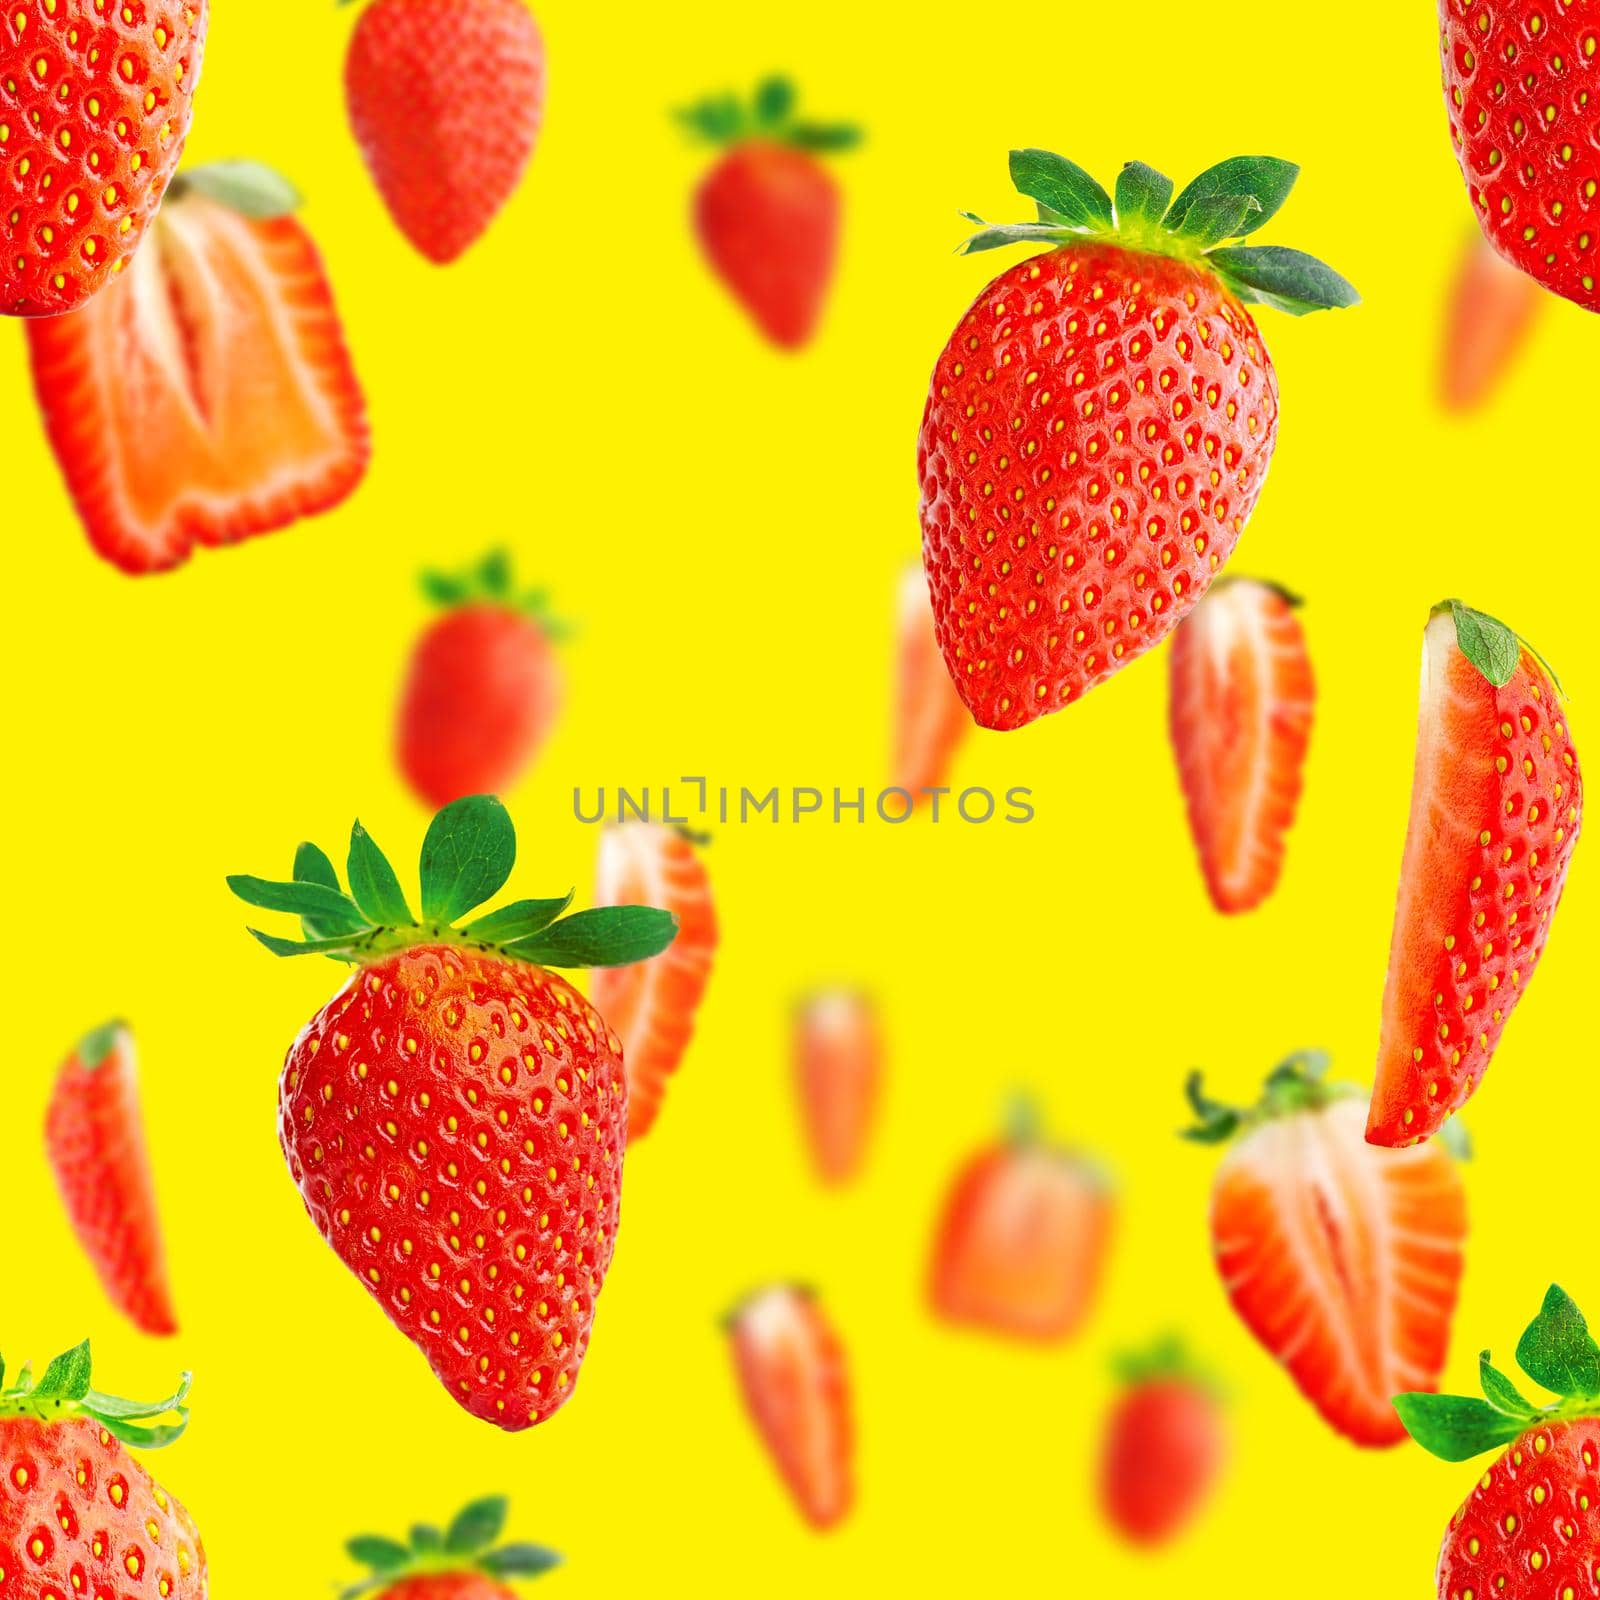 Fresh strawberry seamless pattern. Ripe strawberries isolated on yellow. Package design background. Falling strawberry selective focus.